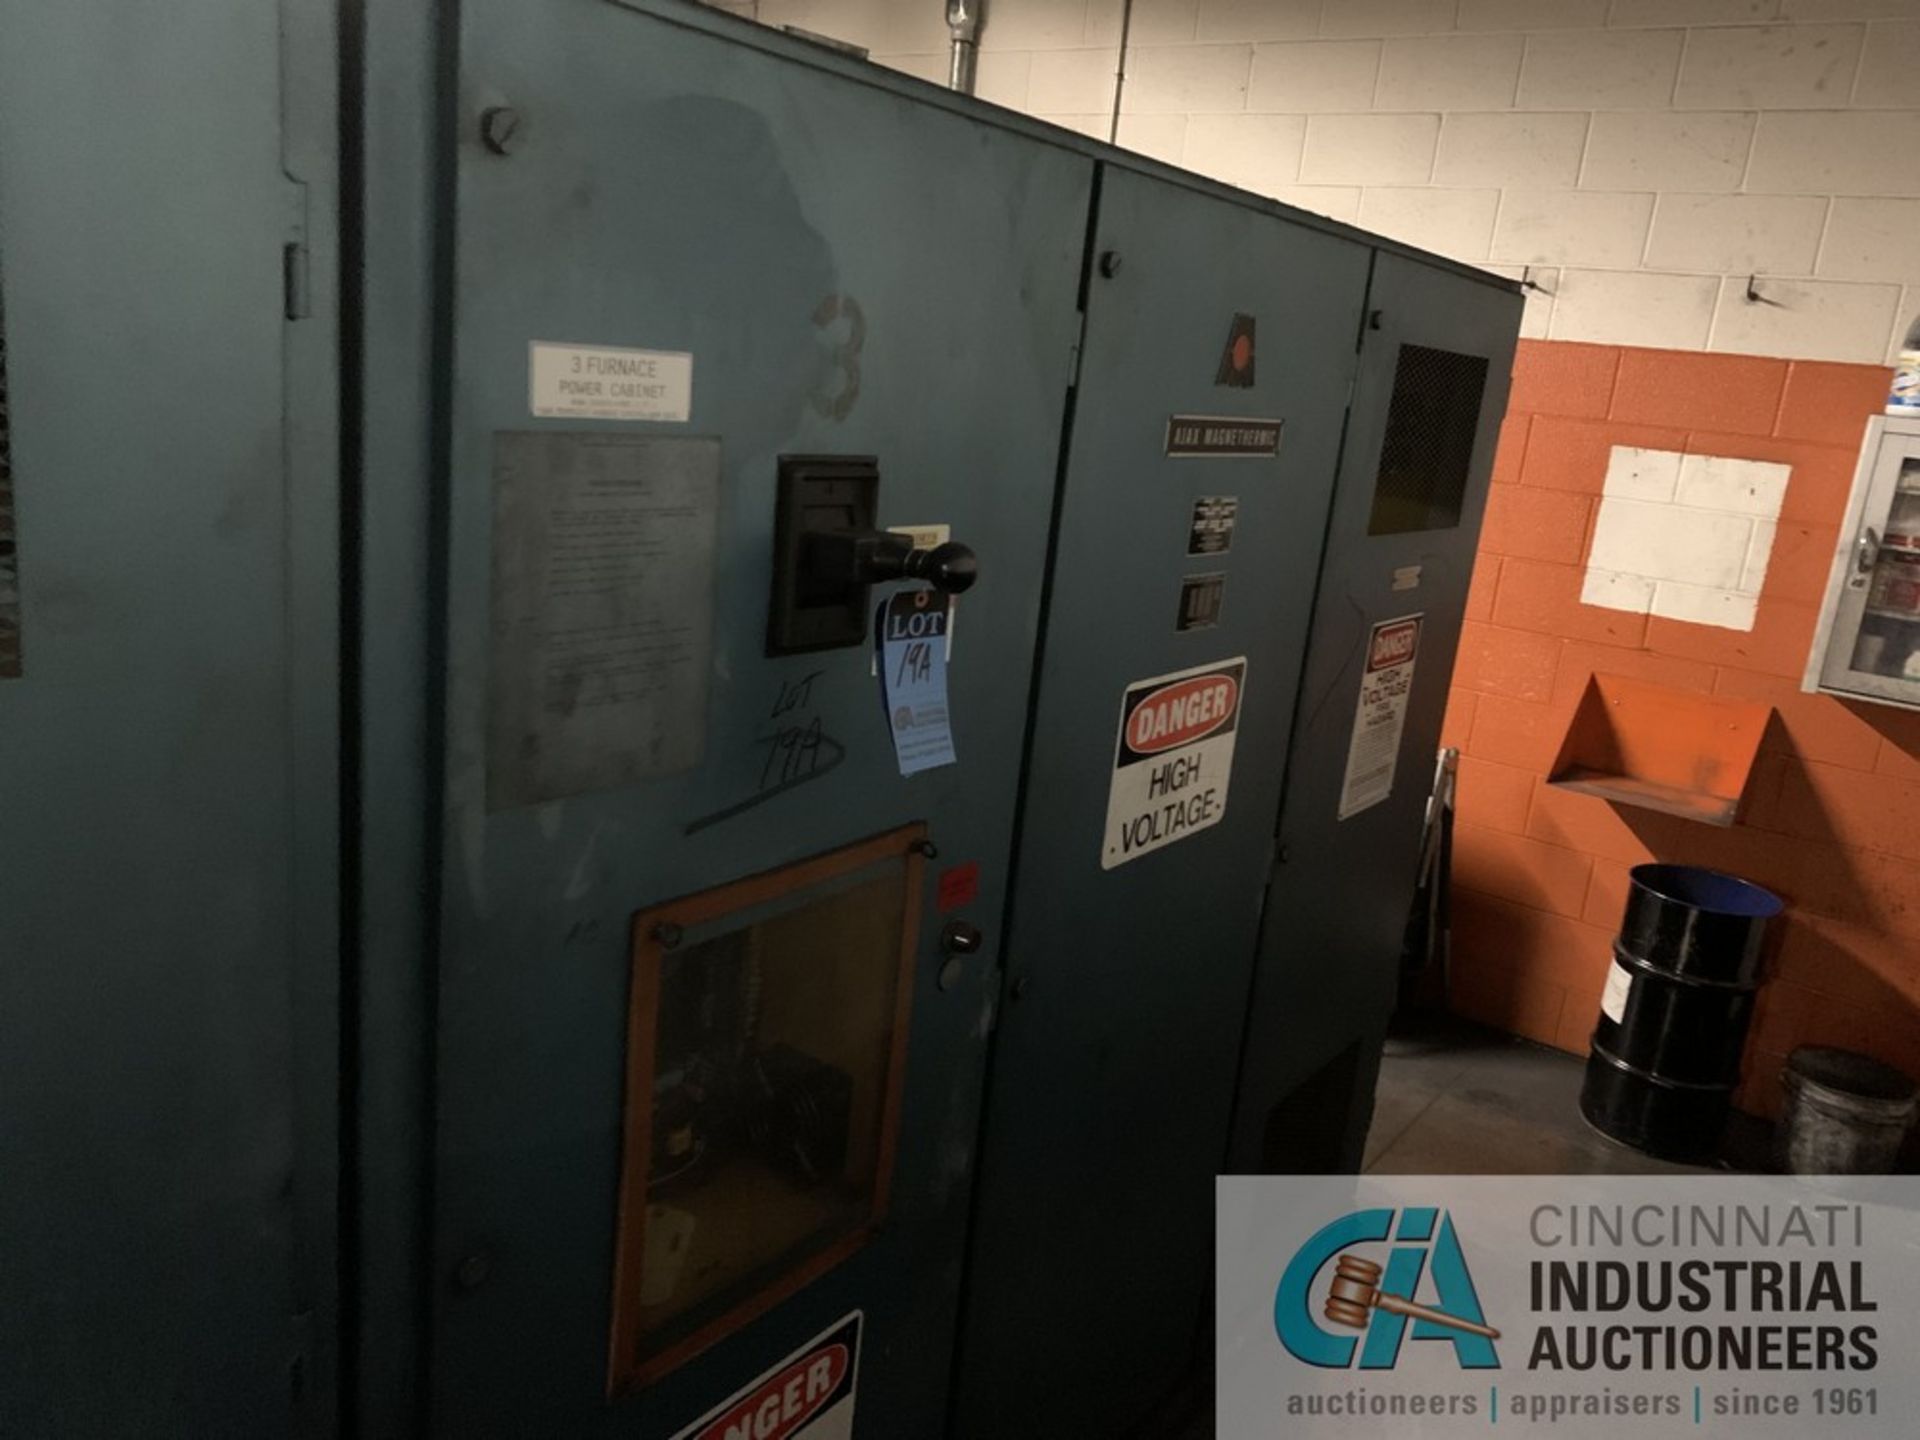 500 KW AJAX MAGNATHERMIC POWER SUPPLY AND CONTROL; 575V, 1,000 KVA, 1,750 AMP, 500 KW, CONTROL PANEL